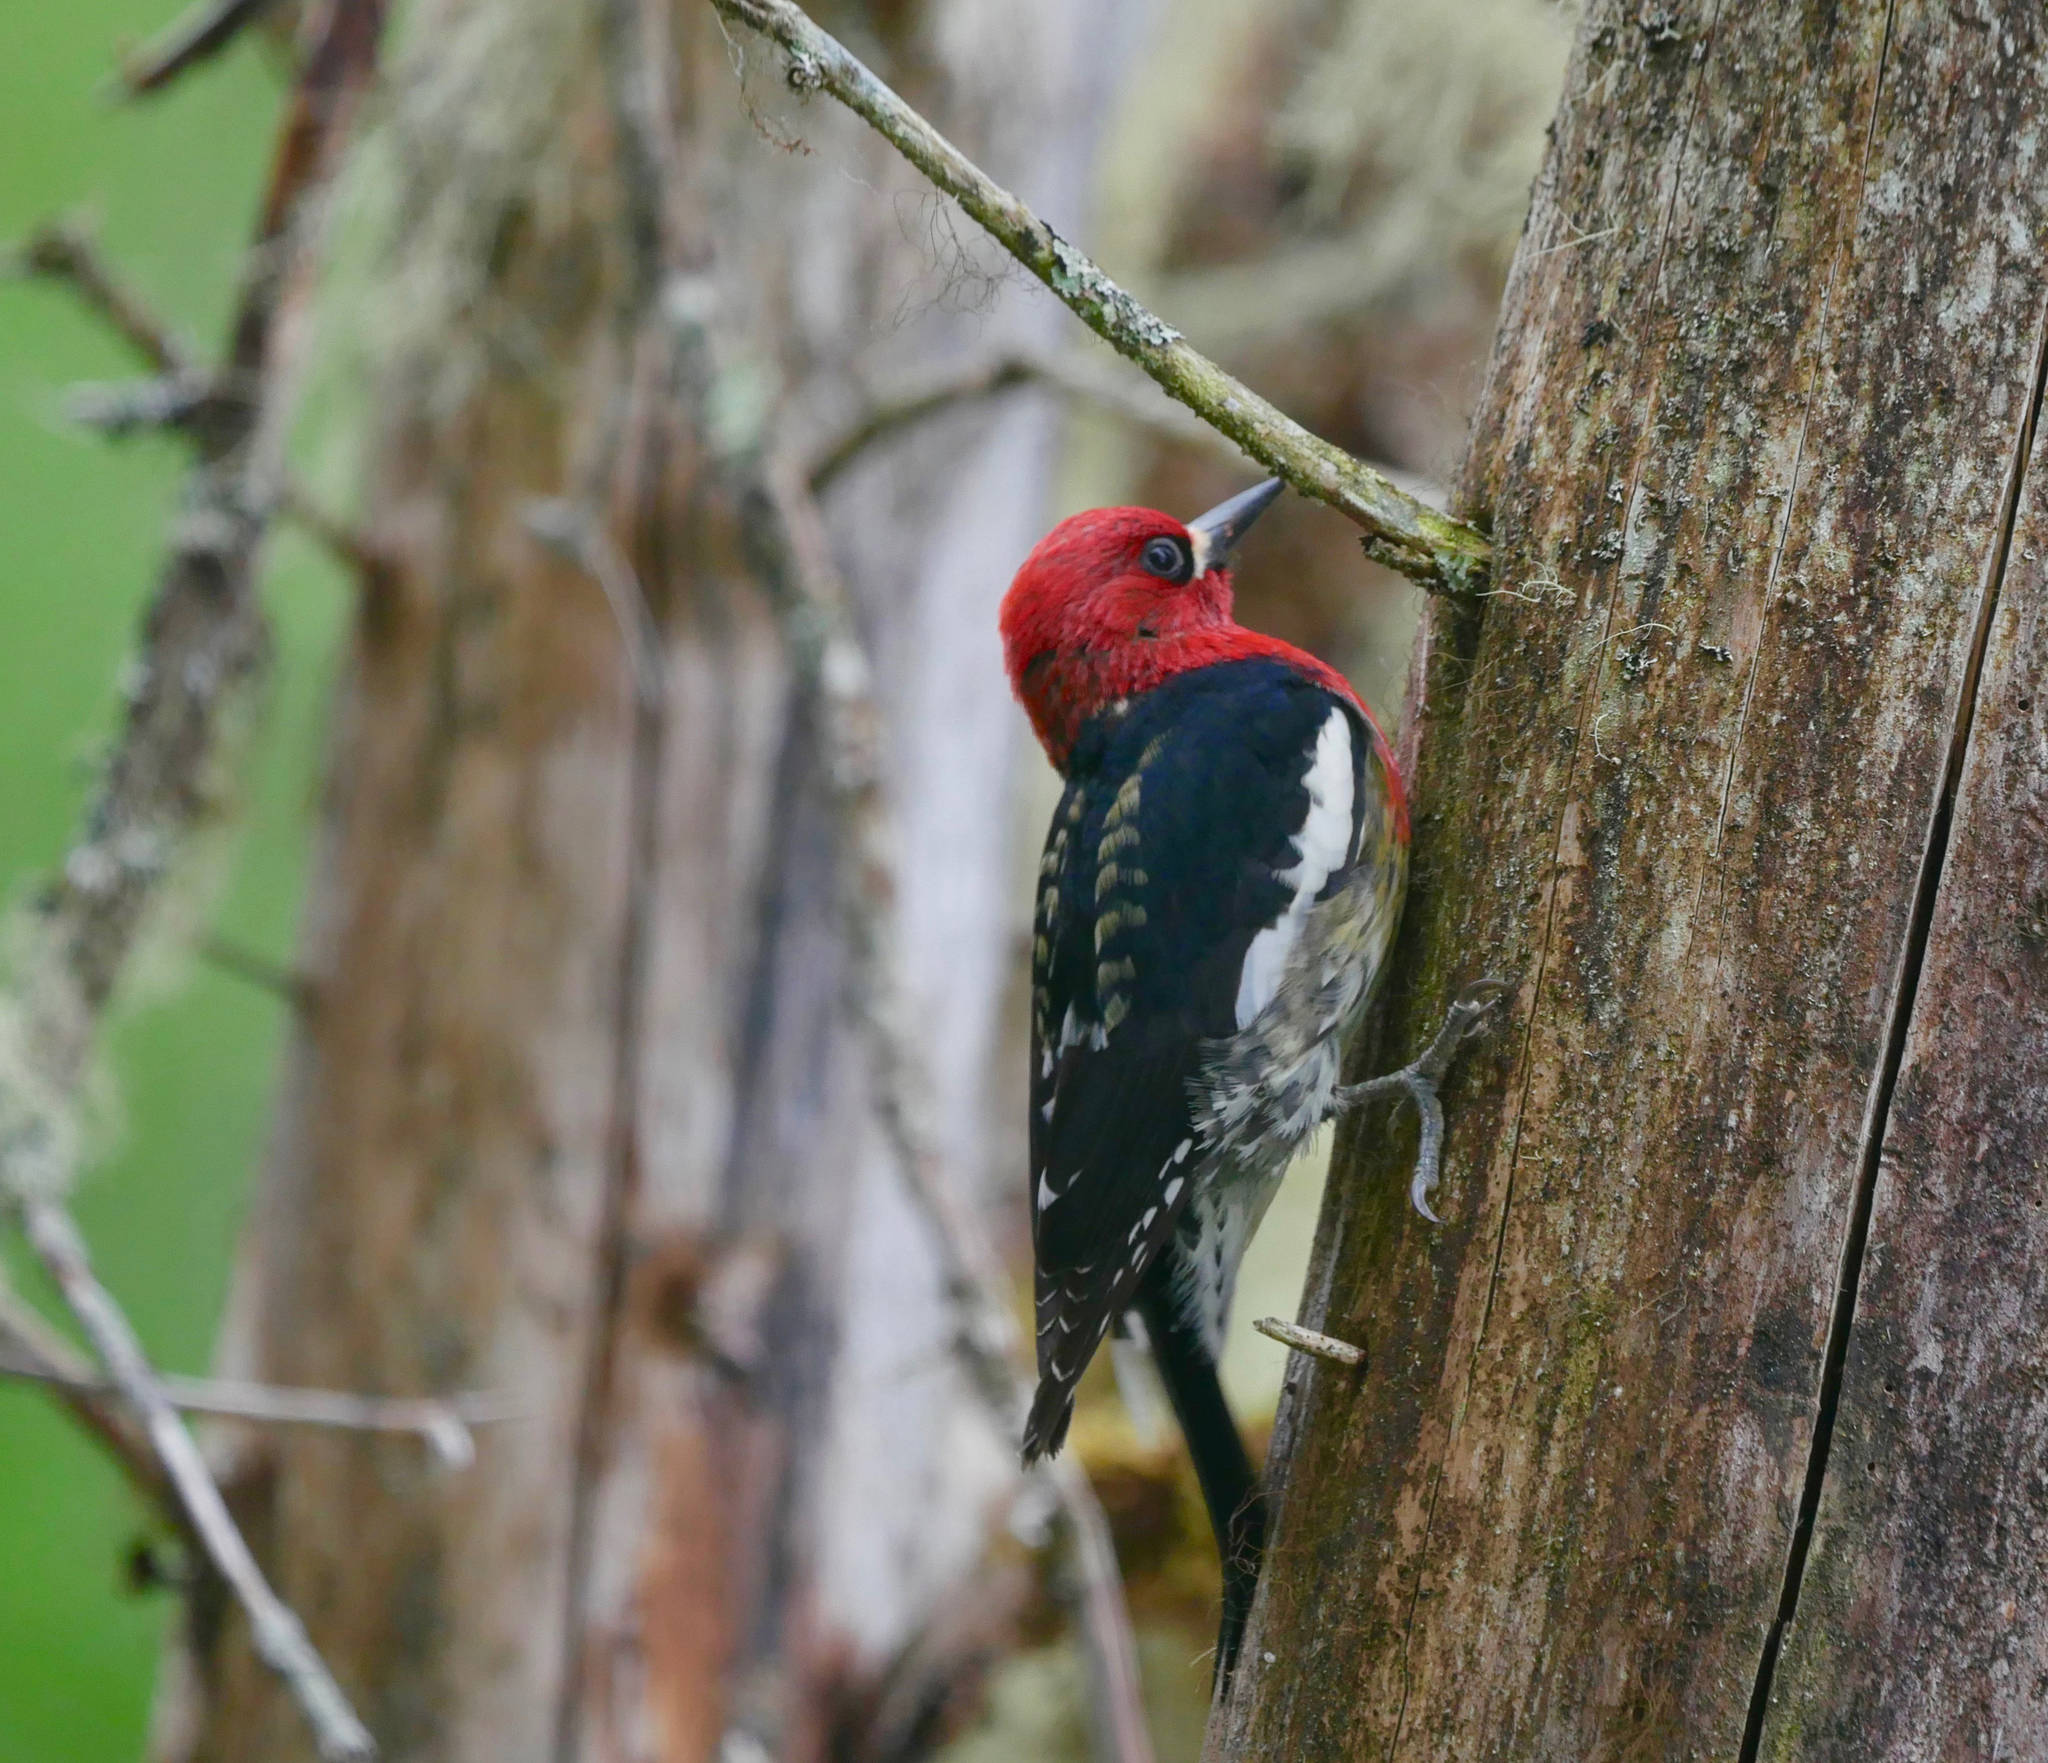 A red-bellied sapsucker at Fish Creek on May 22, 2019. (Courtesy Photo | Janine Reep)